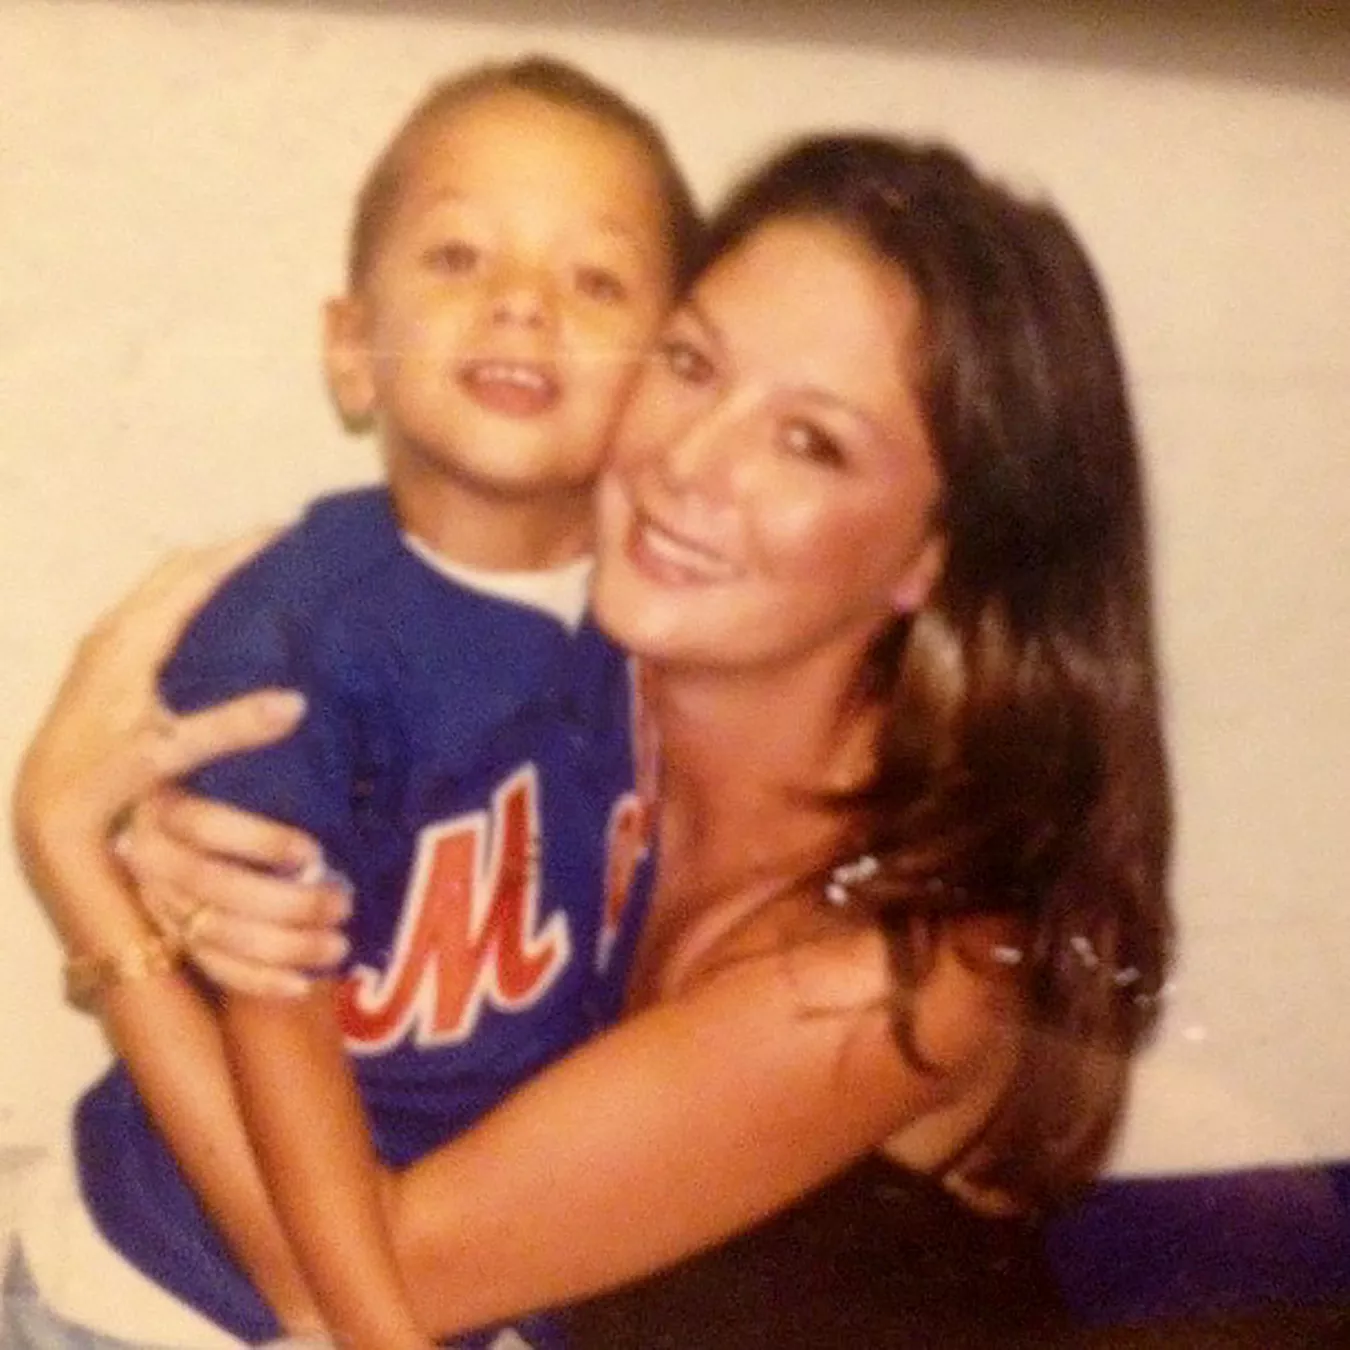 Randi Mahomes Reflects on Being a 'Young' Mom to Patrick: ”˜It Made Me Grow Up in a Great Way”